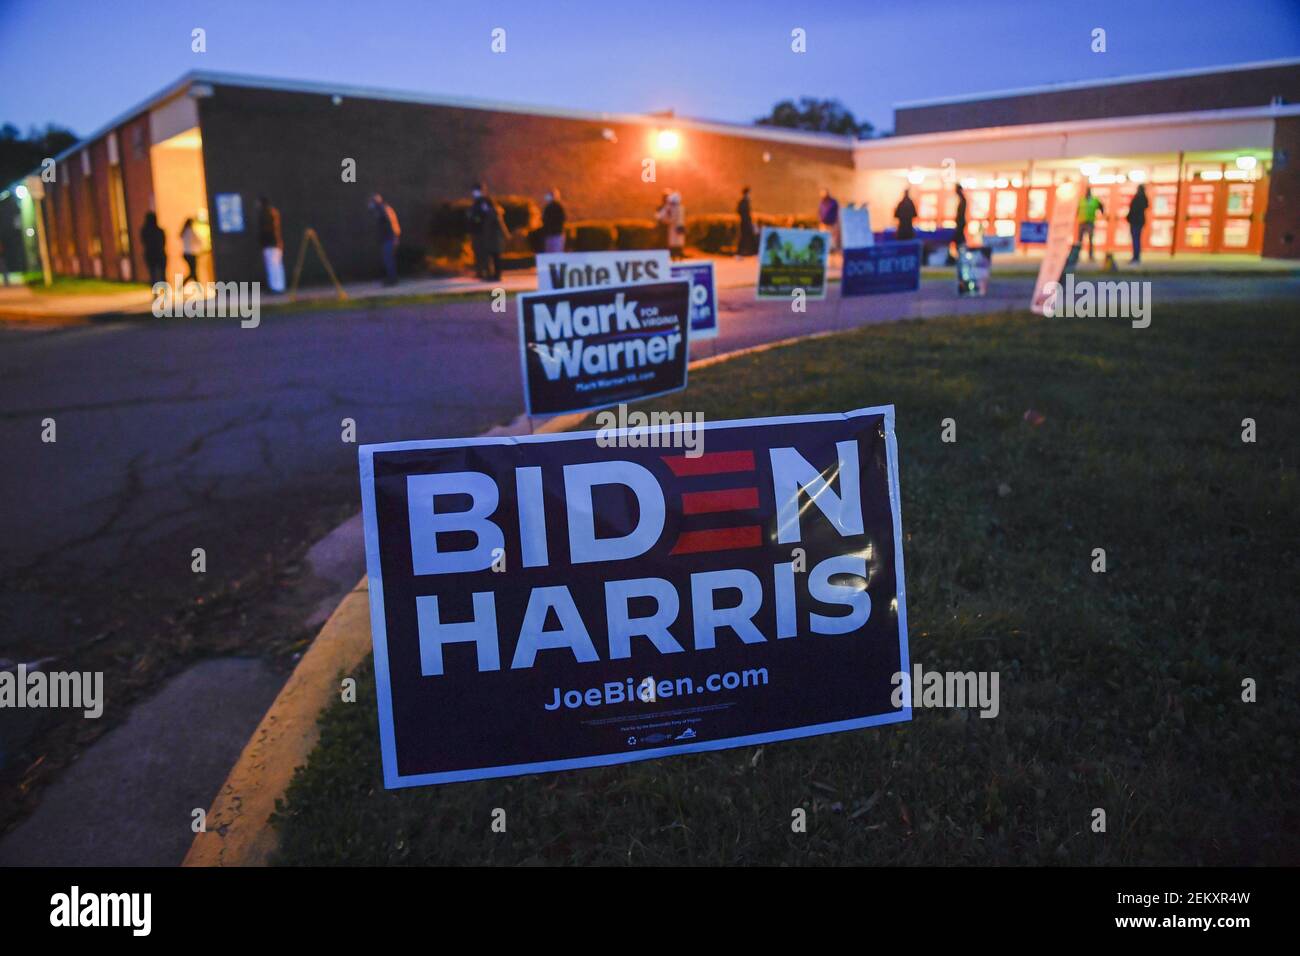 Nov 3, 2020; McLean, VA, USA ;The polls open in Virginia just past 6AM and voters line up at McLean High School in McLean, VA to begin voting on election day for the 2020 Presidential election between Democratic candidate, former Vice President Joe Biden and Republican candidate President Donald Trump. Mandatory Credit: Jack Gruber-USA TODAY/Sipa USA Stock Photo